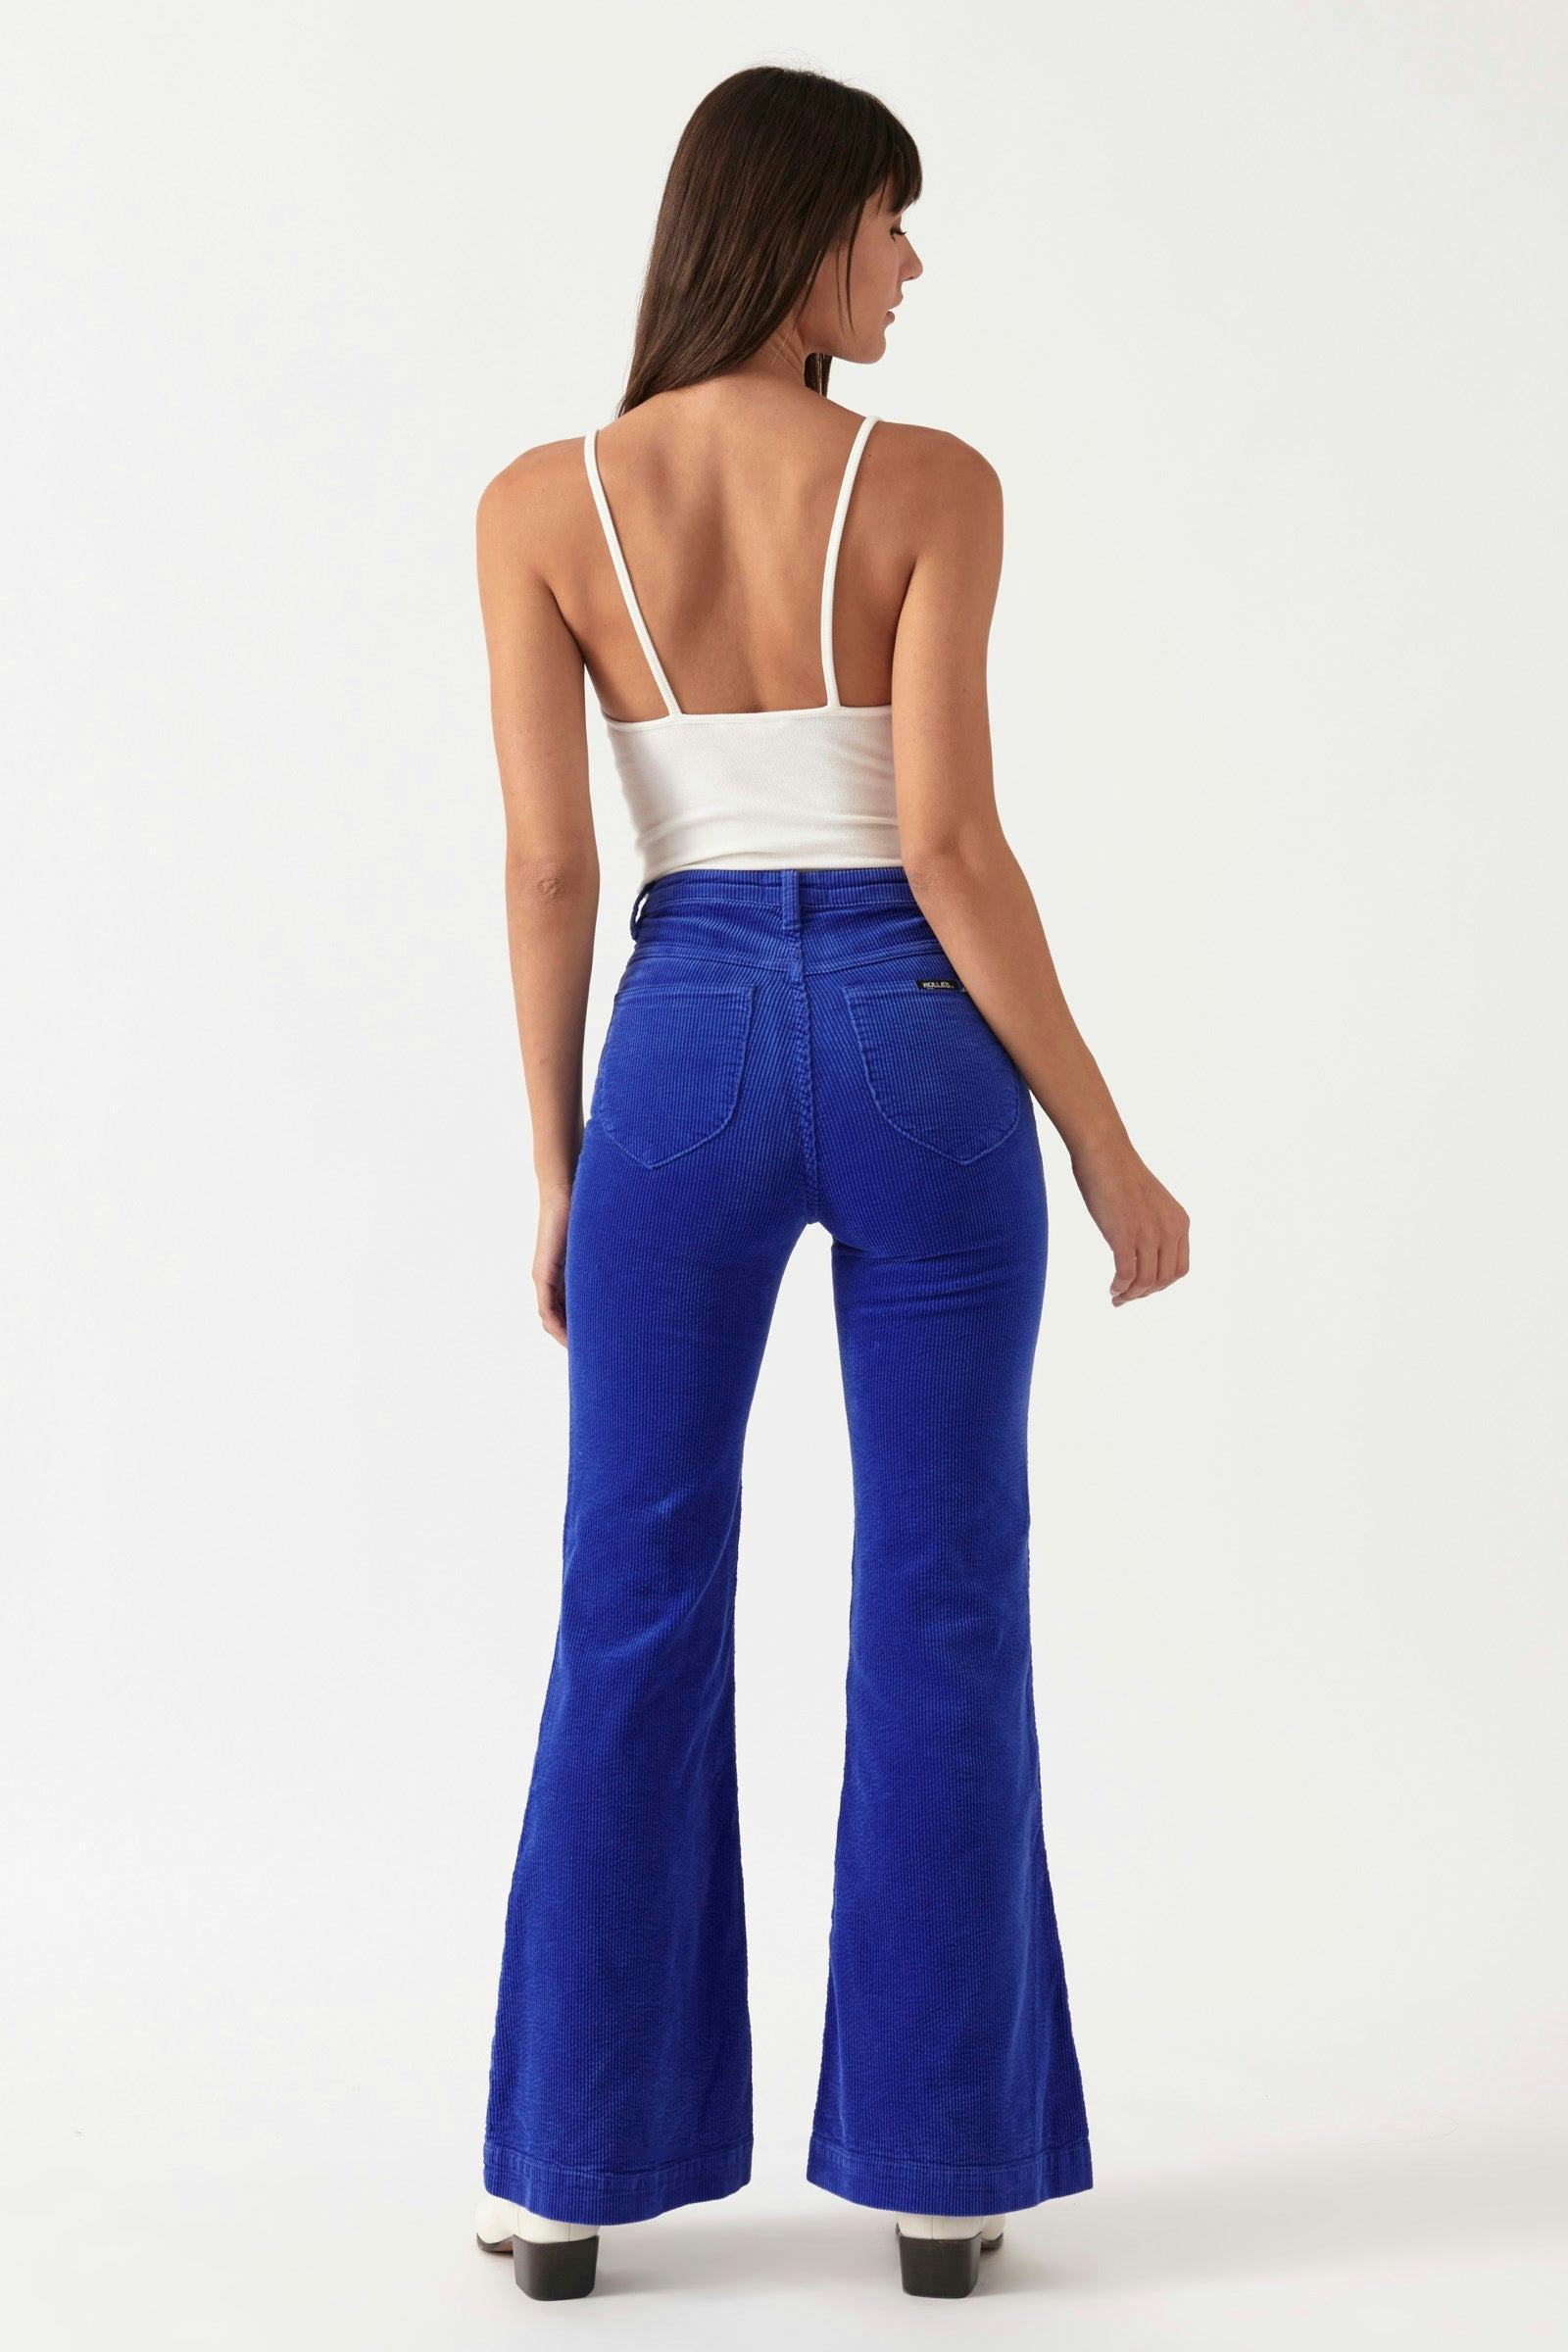 Buy Eastcoast Flare - Electric Blue Online | Rollas Jeans